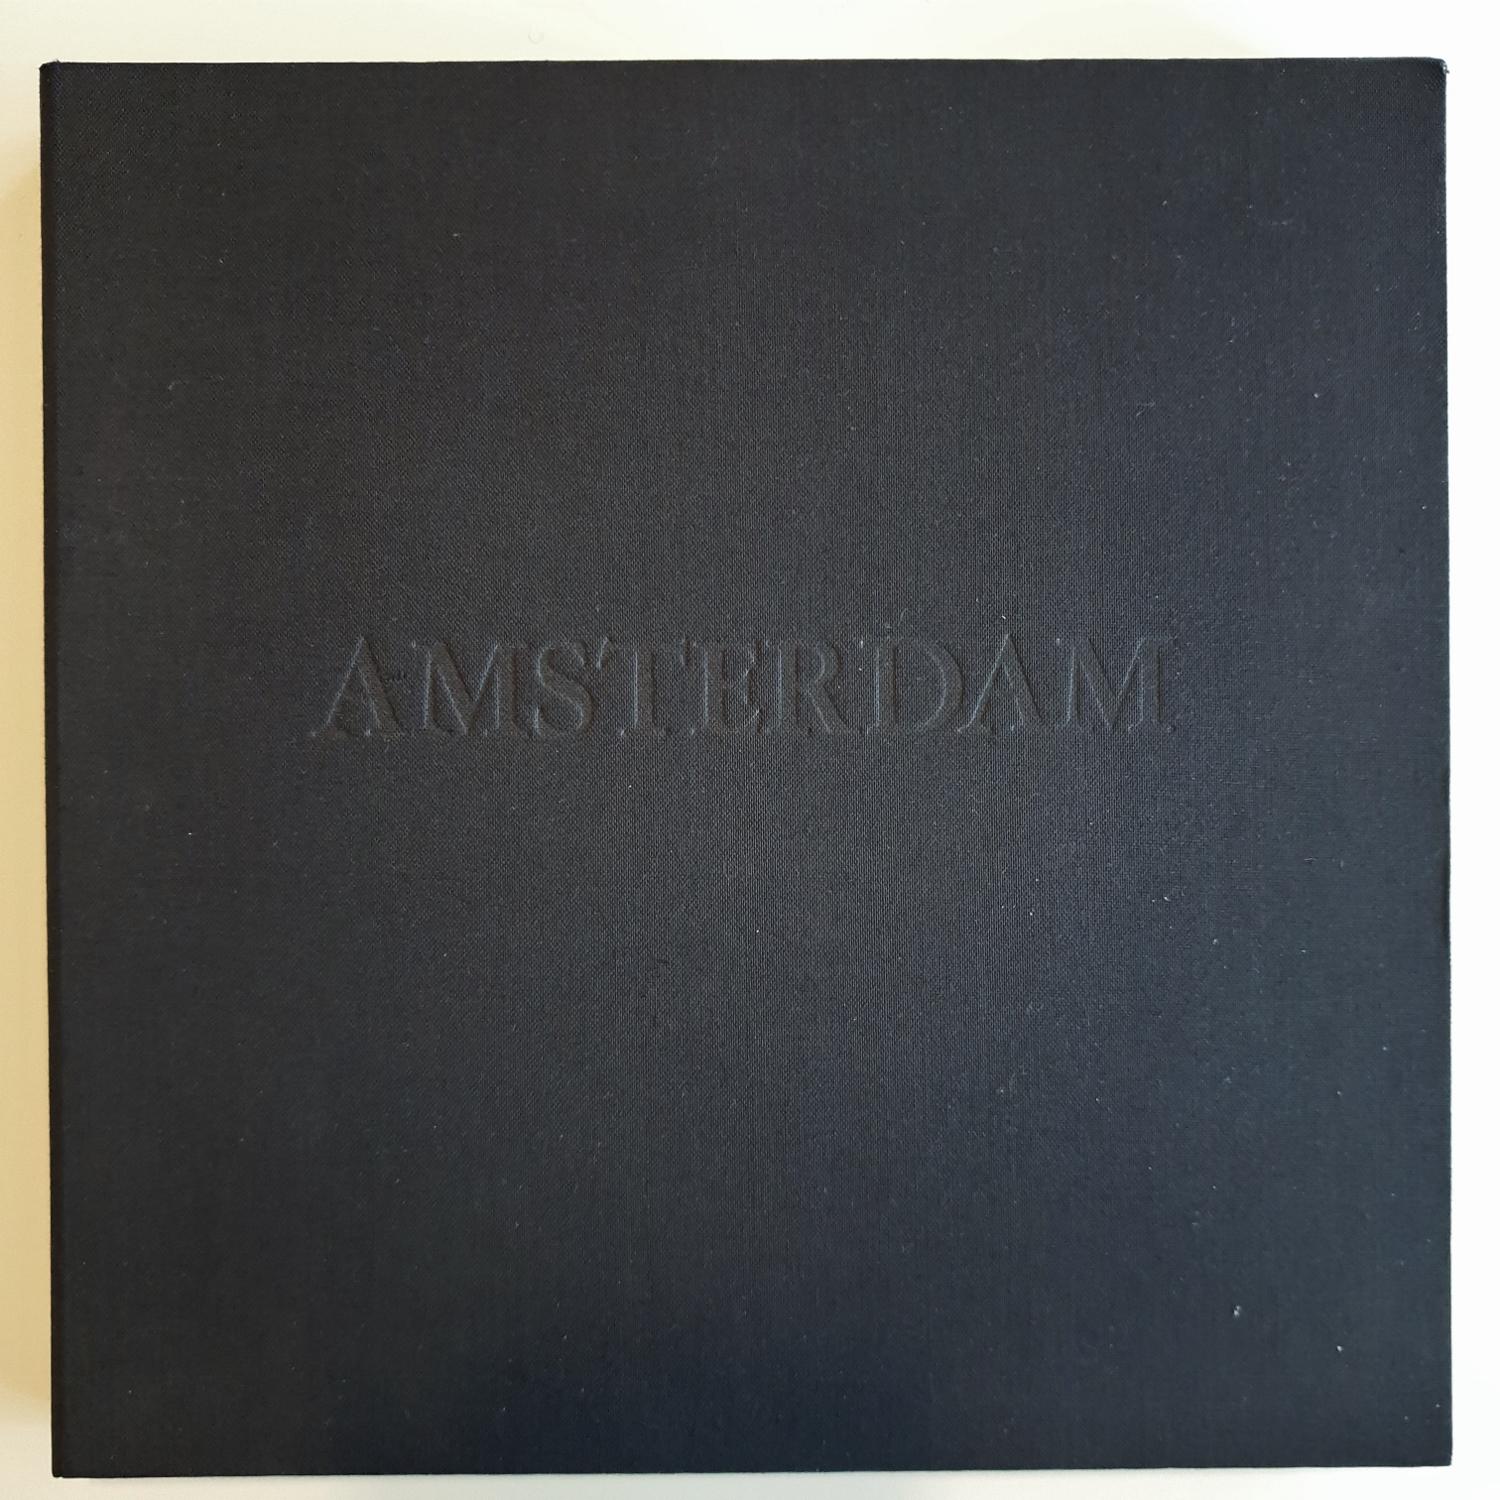 Amsterdam III is an intriguing early career aquatint dry-needle etch print by renowned French-Dutch artist Olivier Julia. It depicts a detail of an old Amsterdam house facade is both abstract and realistic at the same time. The paper used is 240